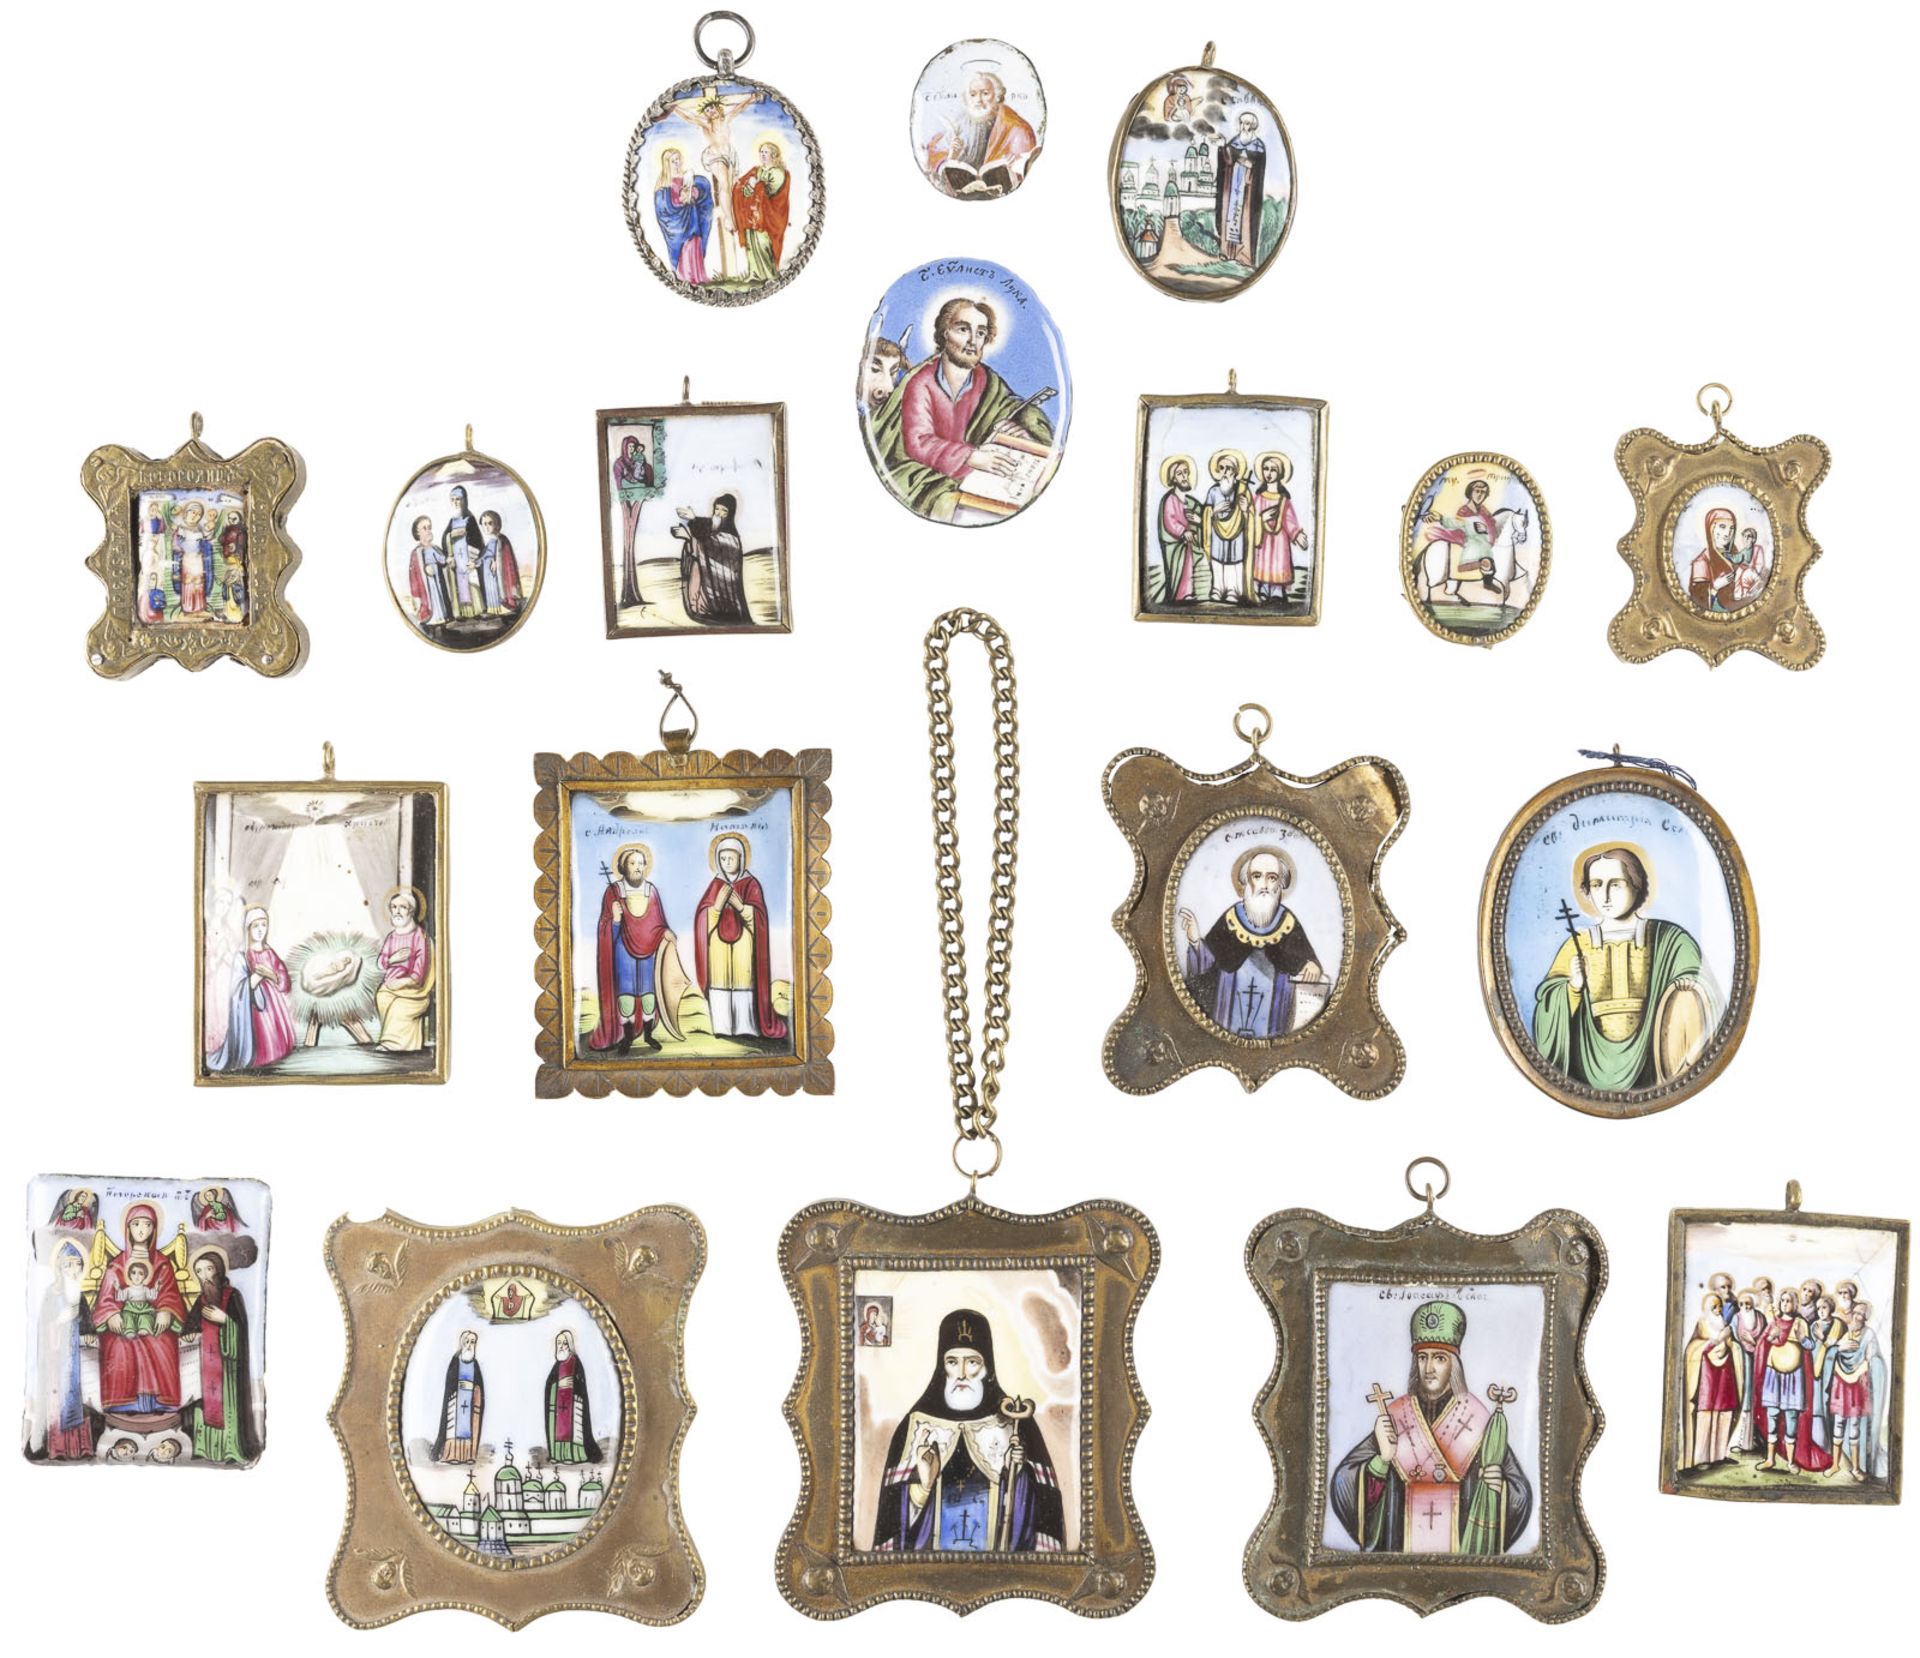 A COLLECTION OF 19 ENAMEL ICONS (FINIFTI) SHOWING THE MOTHER OF GOD AND SAINTS